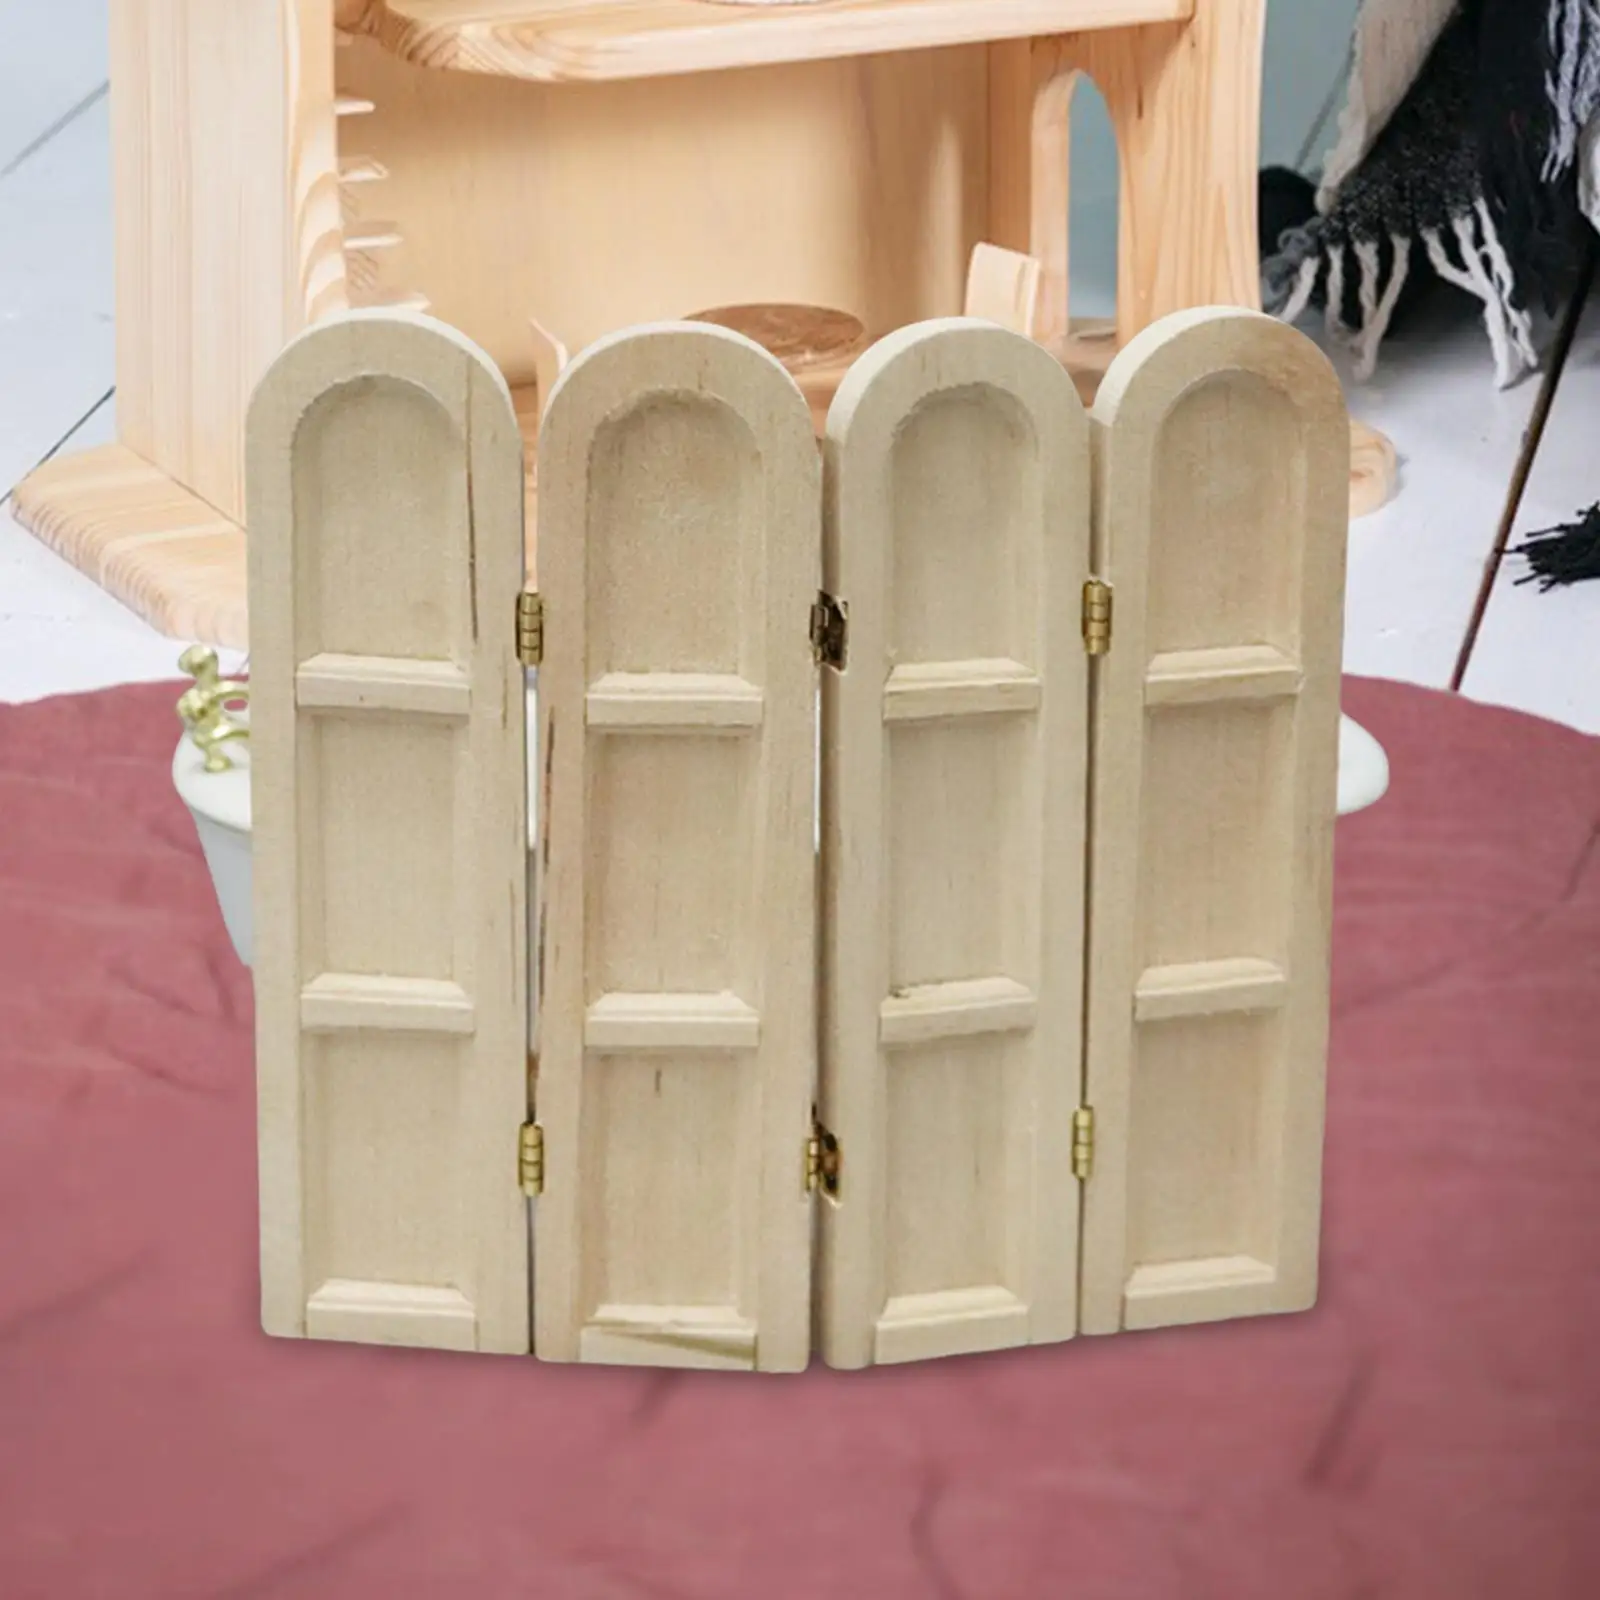 1:12 Dollhouse Folding Screen Wood Retro Photo Props Dollhouse Furniture for Living Room Bedroom Office Kids Play Toy Life Scene